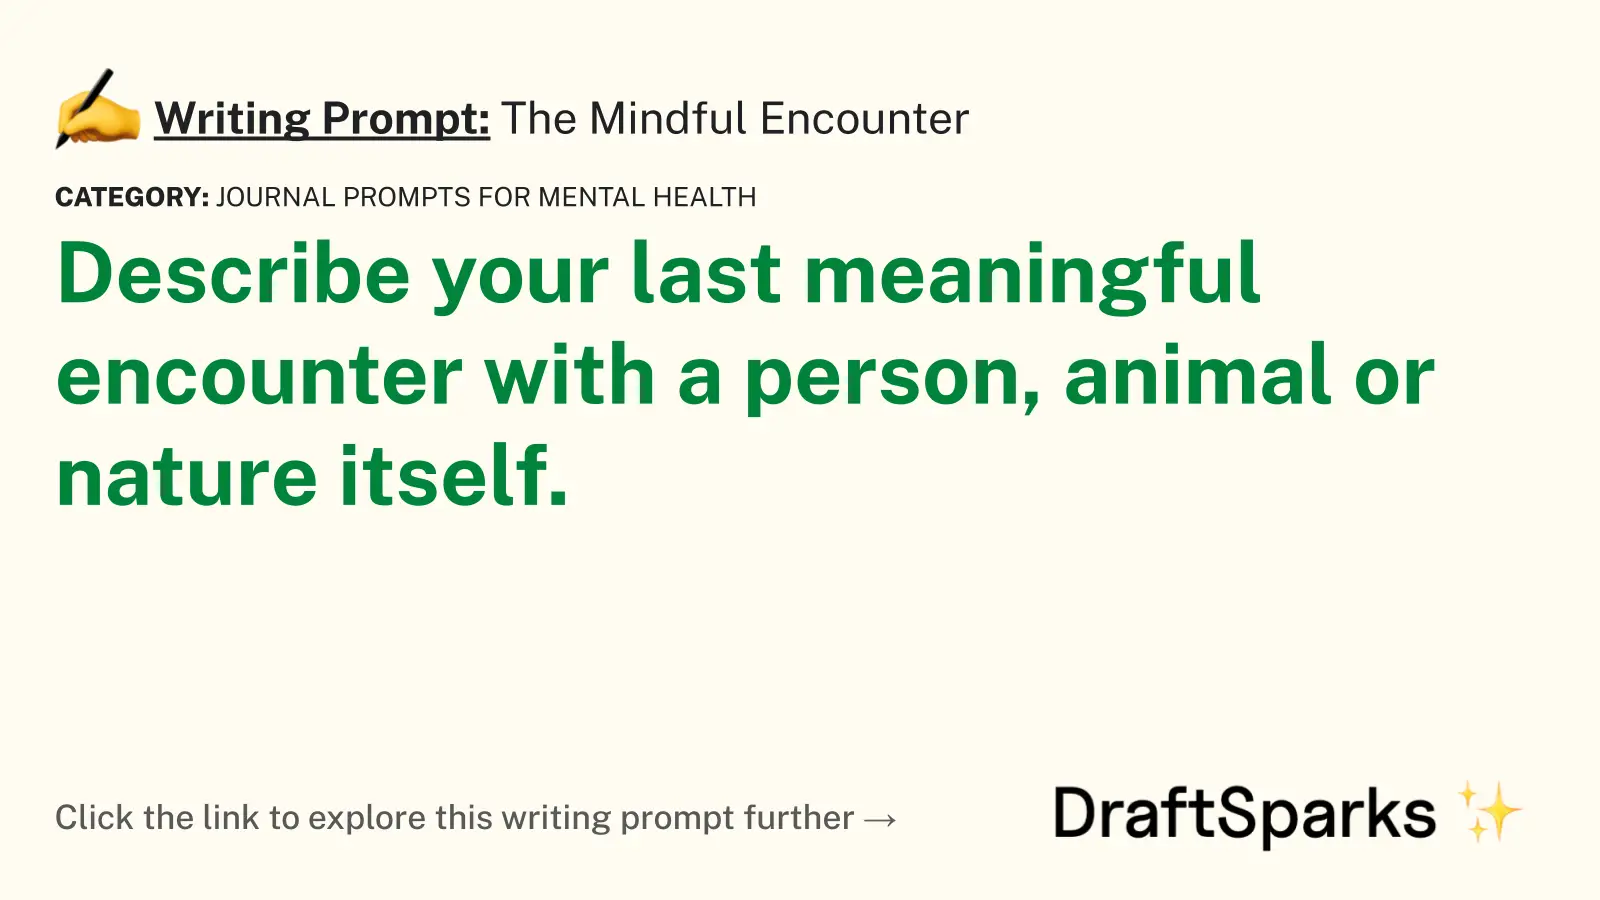 The Mindful Encounter